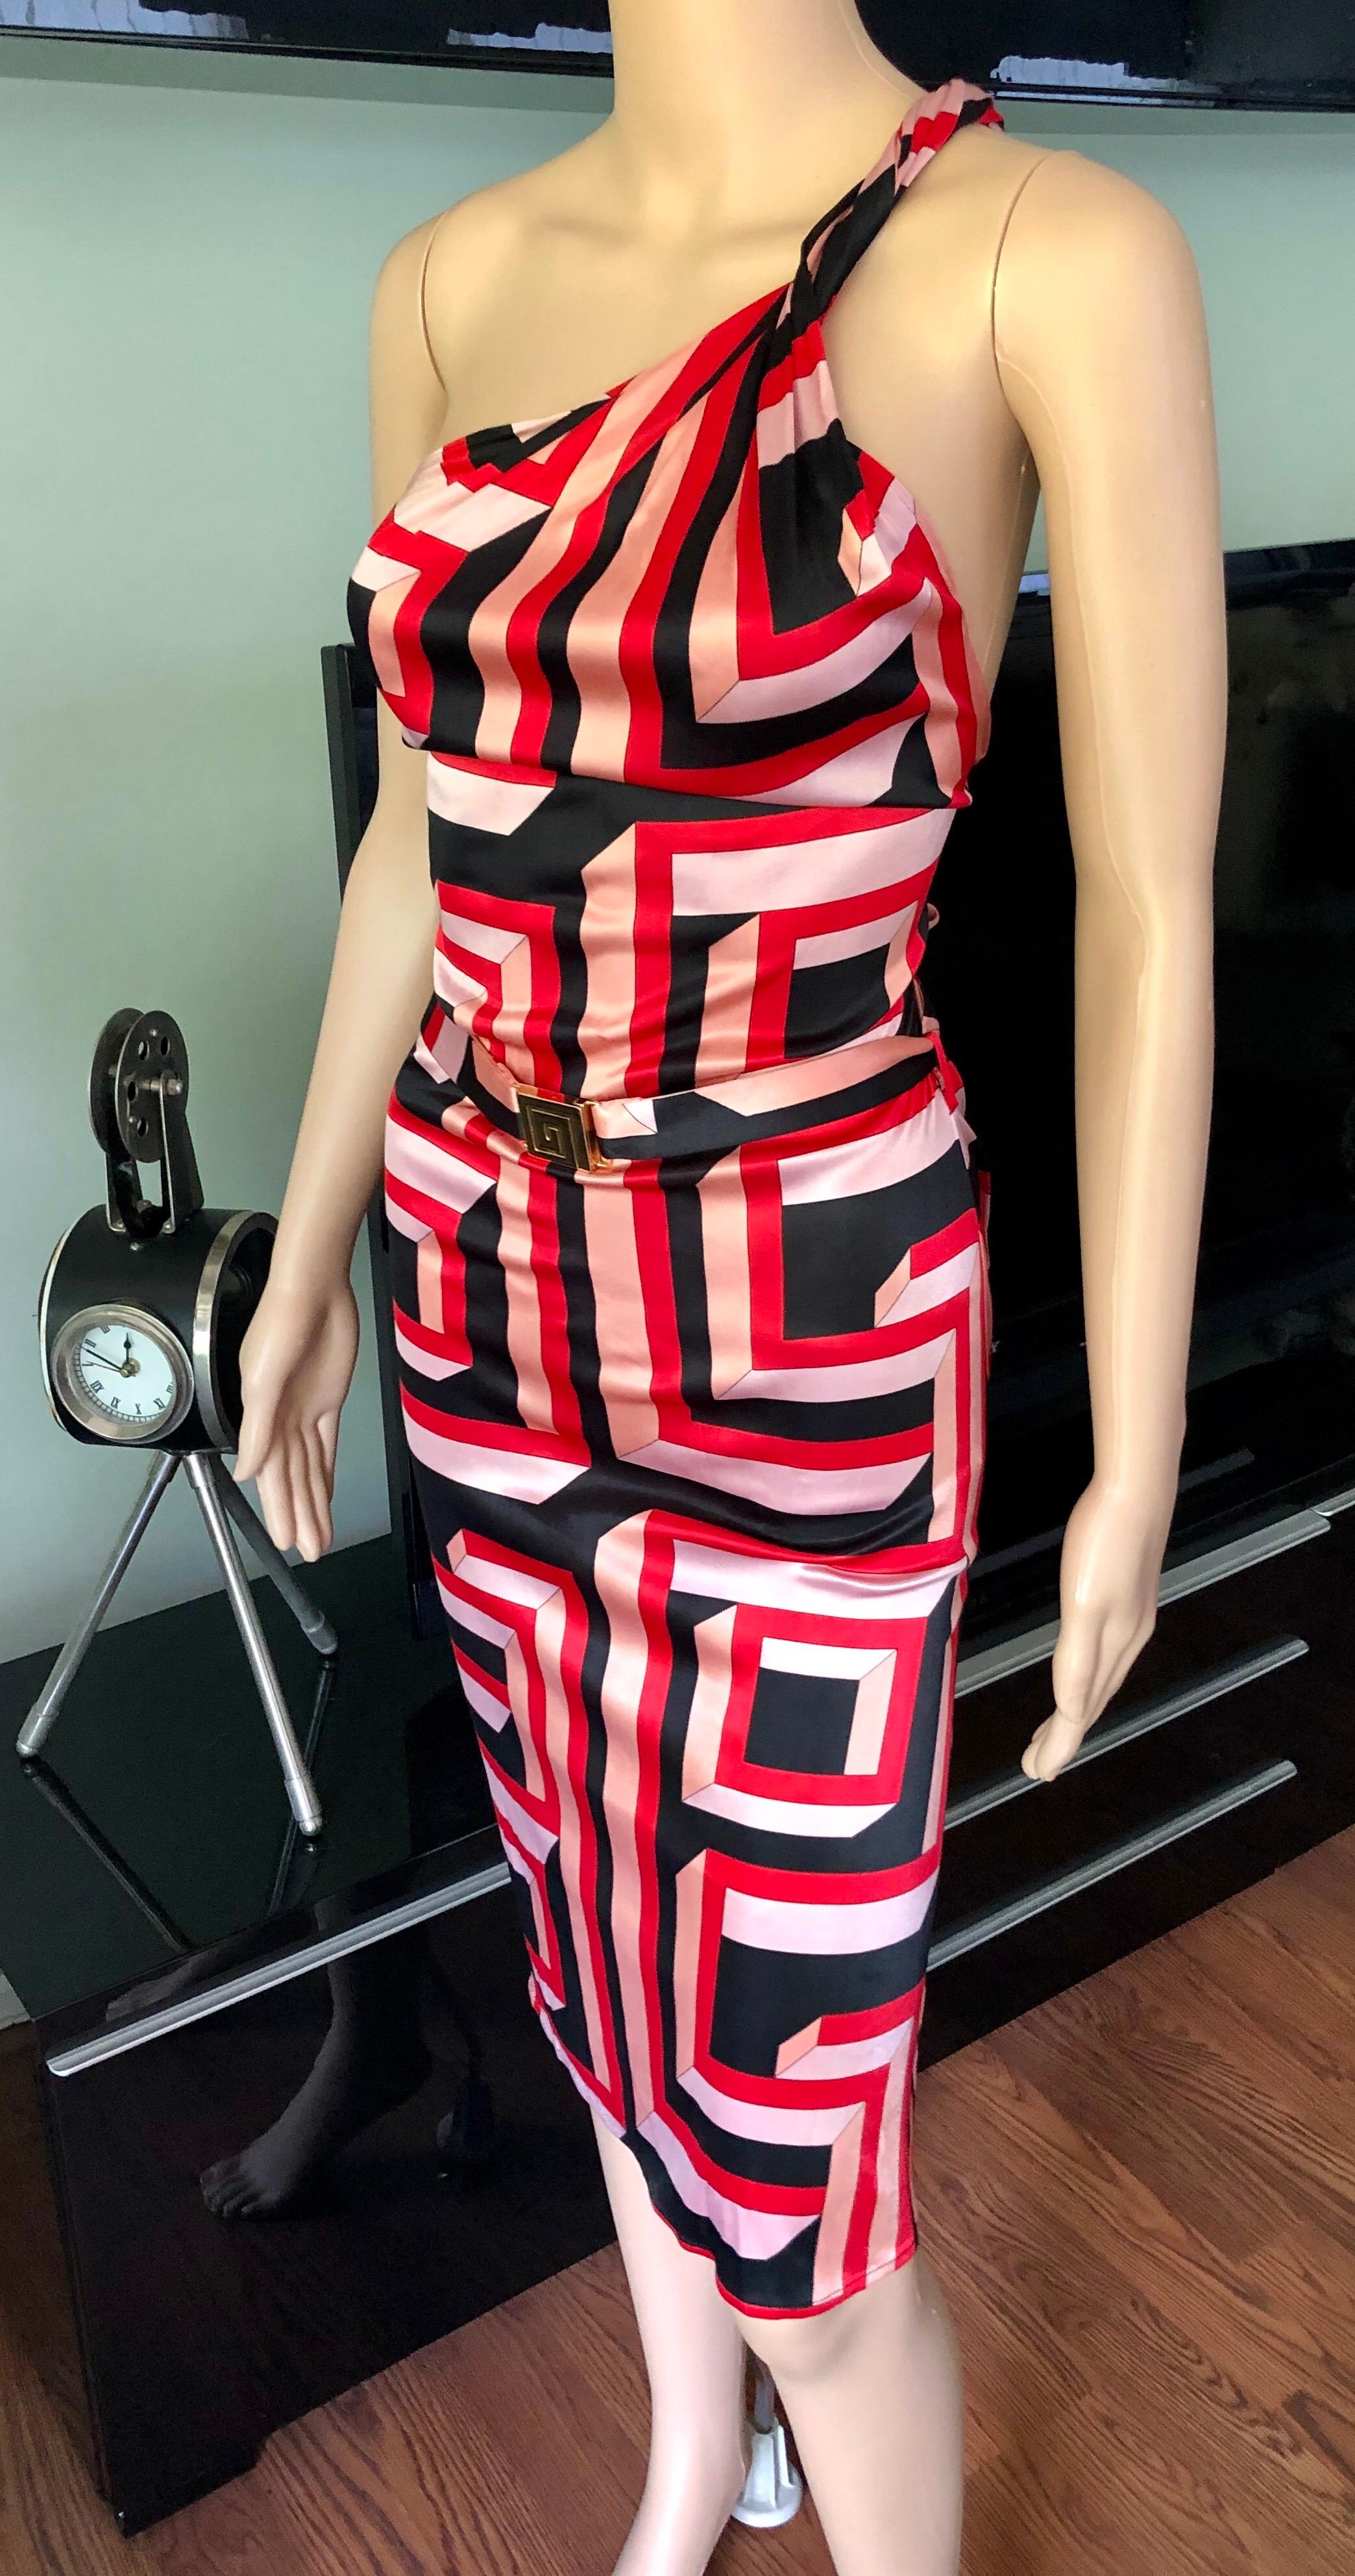 Gianni Versace S/S 2001 Vintage Geometric Print Belted Open Back Dress For Sale 2